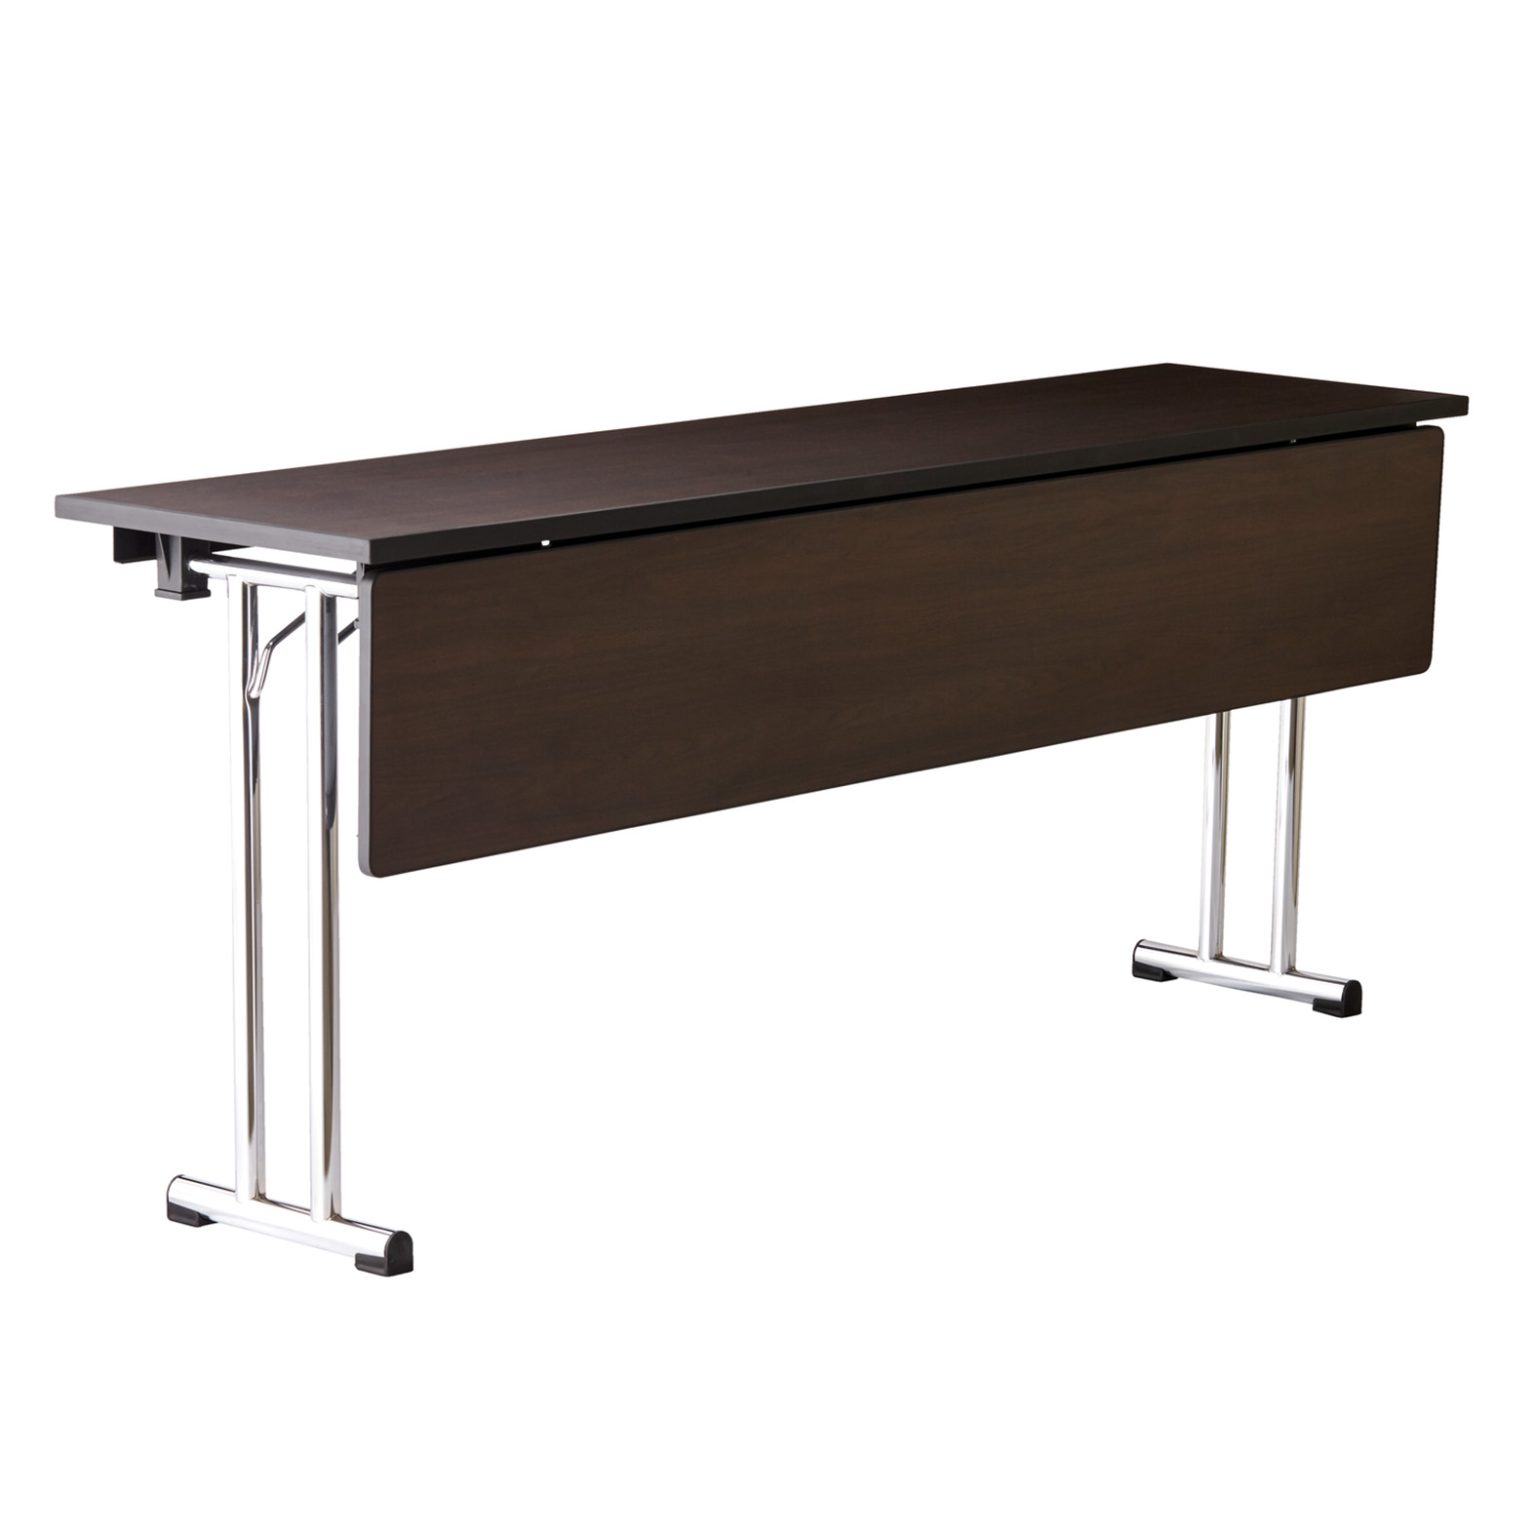 Connex Conference Table NARDI Manufacturing